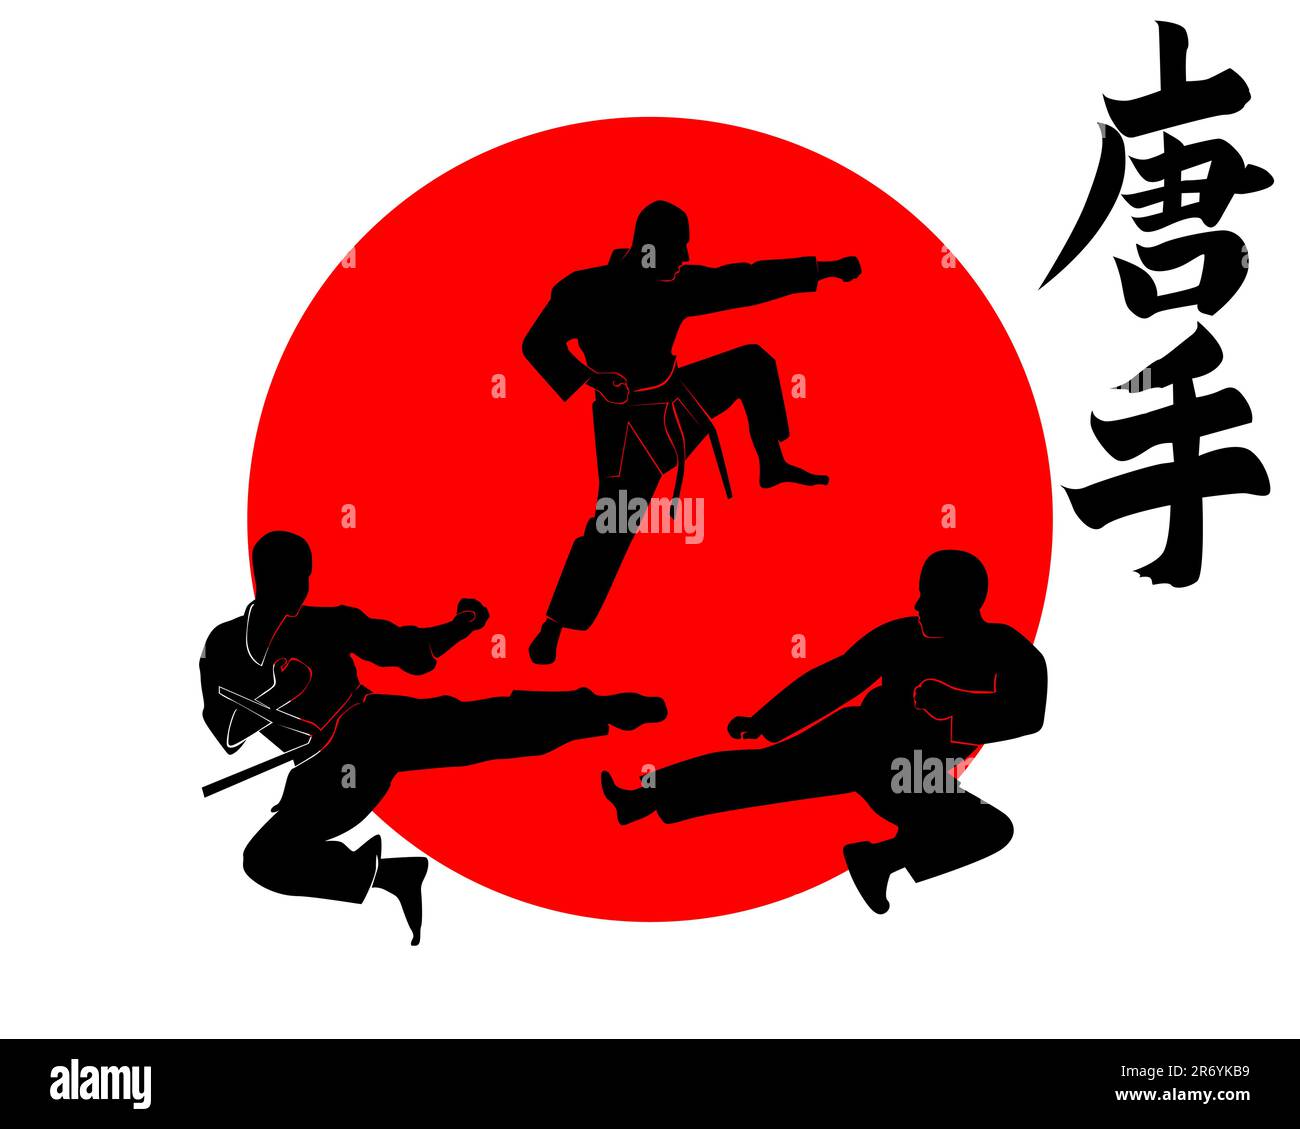 Three silhouettes Karate on a red circle Stock Vector